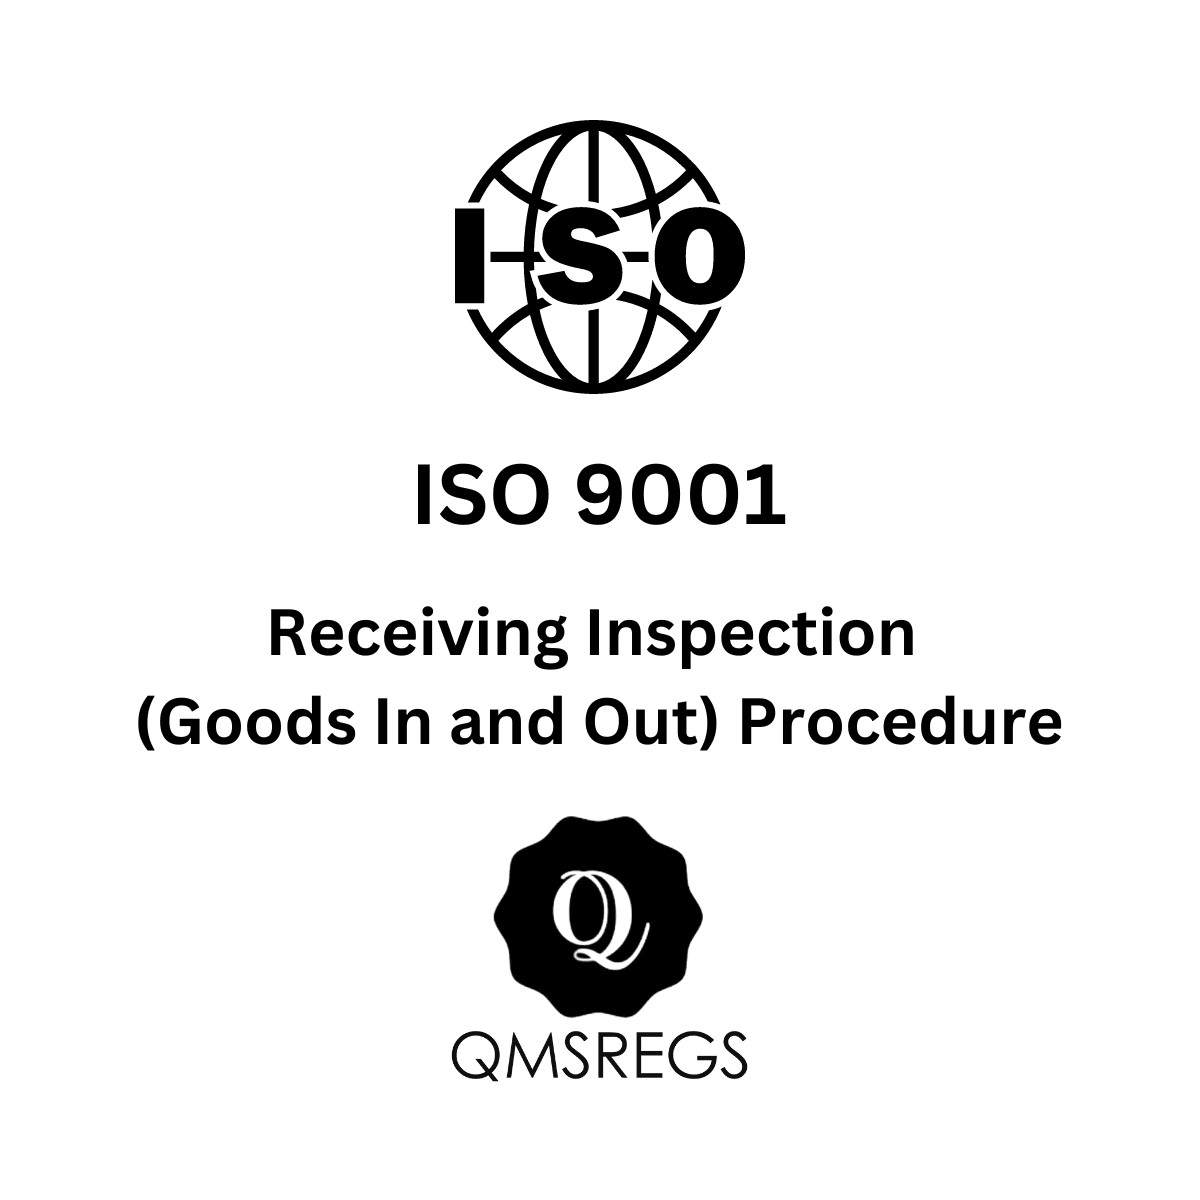 ISO 9001 Receiving Inspection (Goods In and Out) Procedure Template